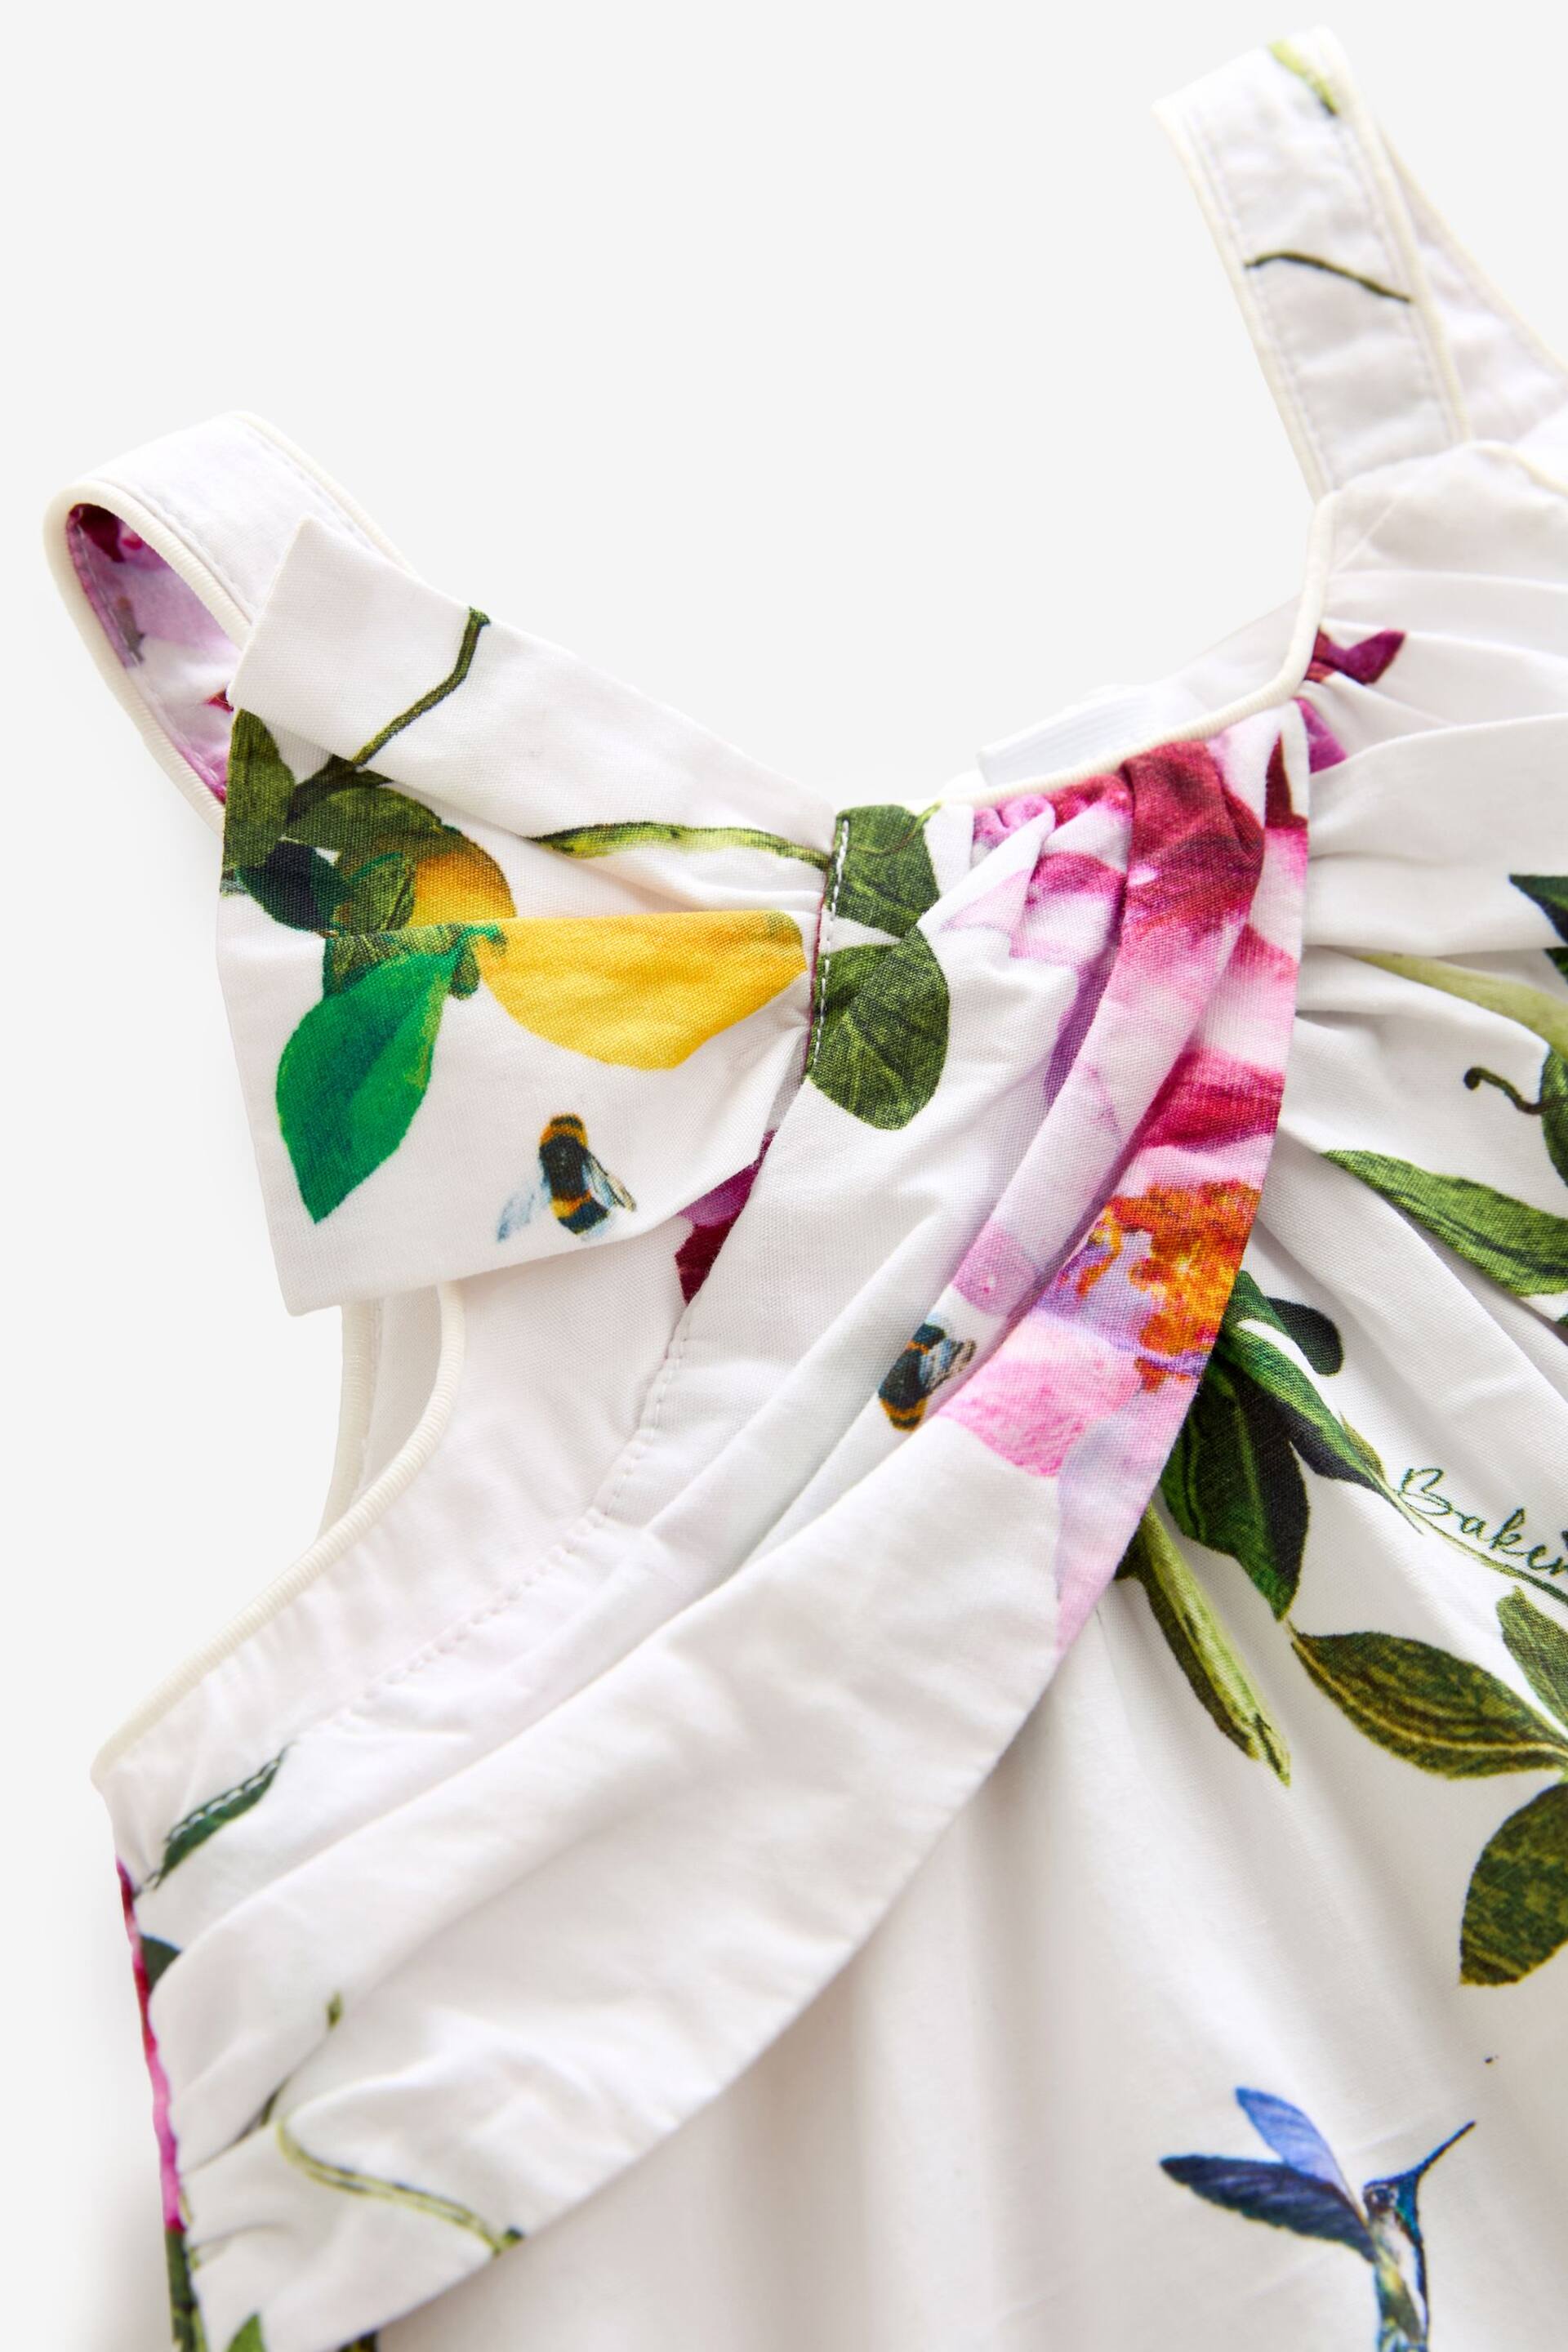 Baker by Ted Baker Floral Bow Woven White Dress - Image 9 of 11